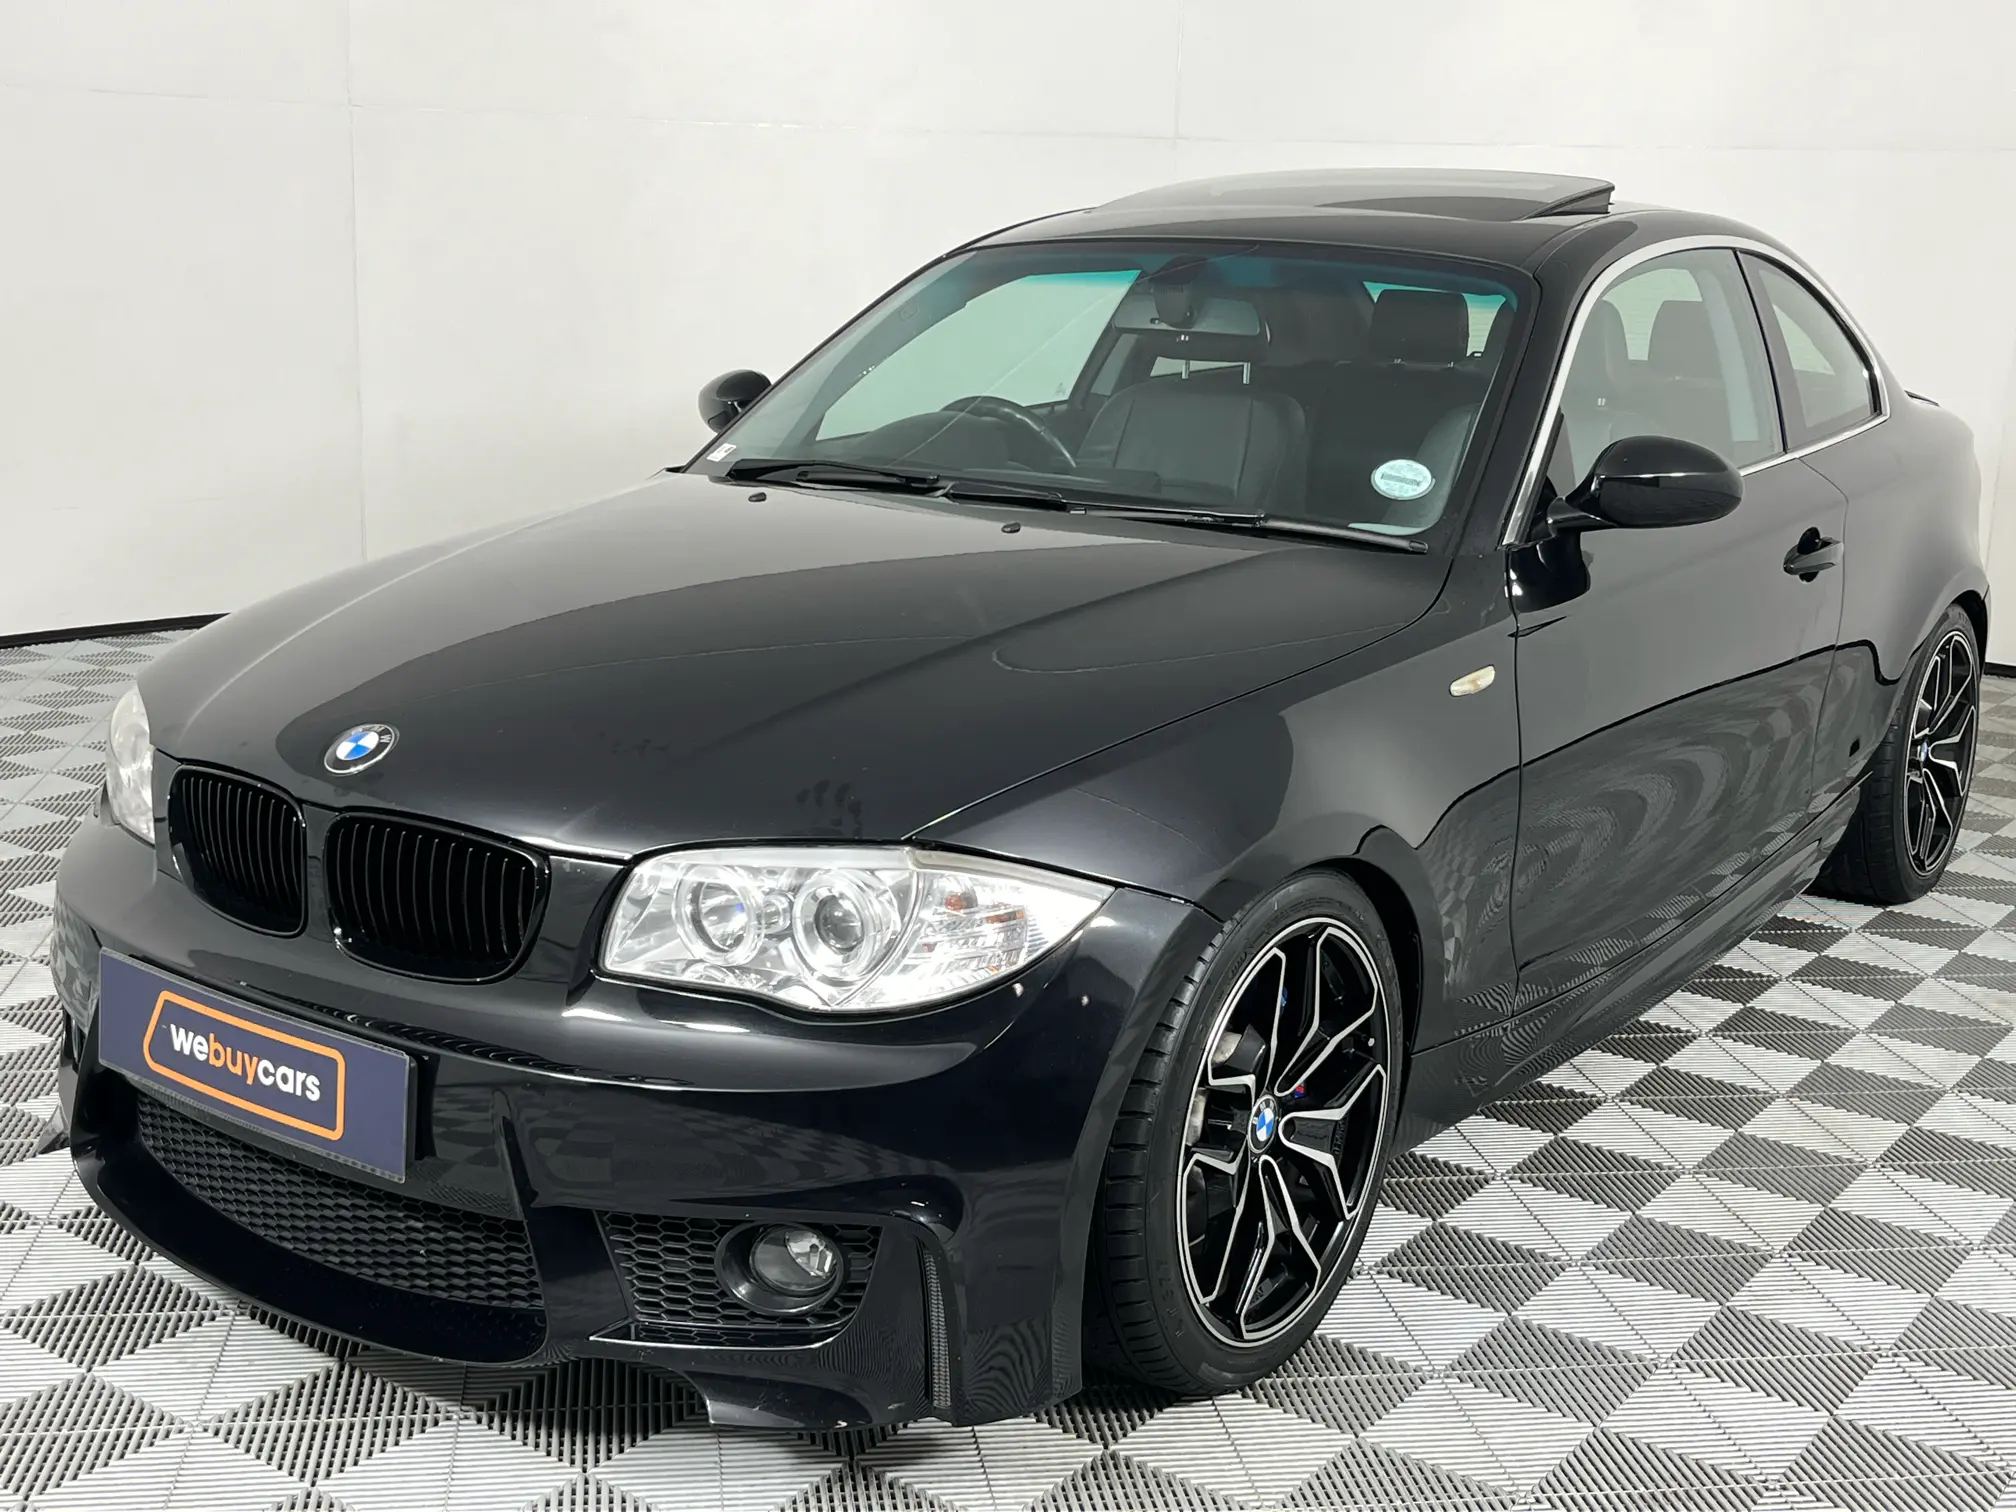 2008 BMW 1 Series 135i Coupe